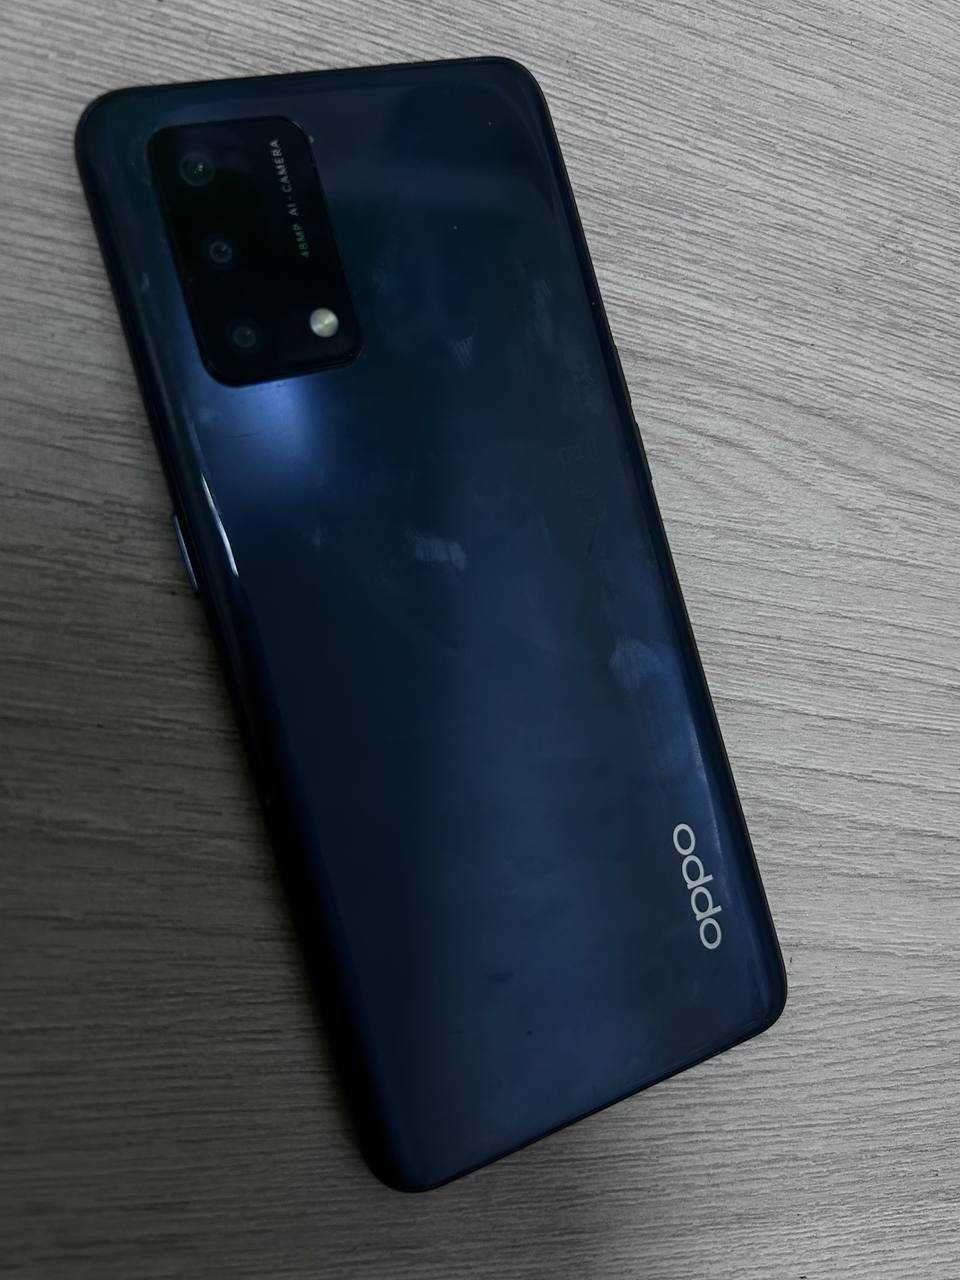 Oppo A74\128 (г. Астана, Женис 24) л 280259